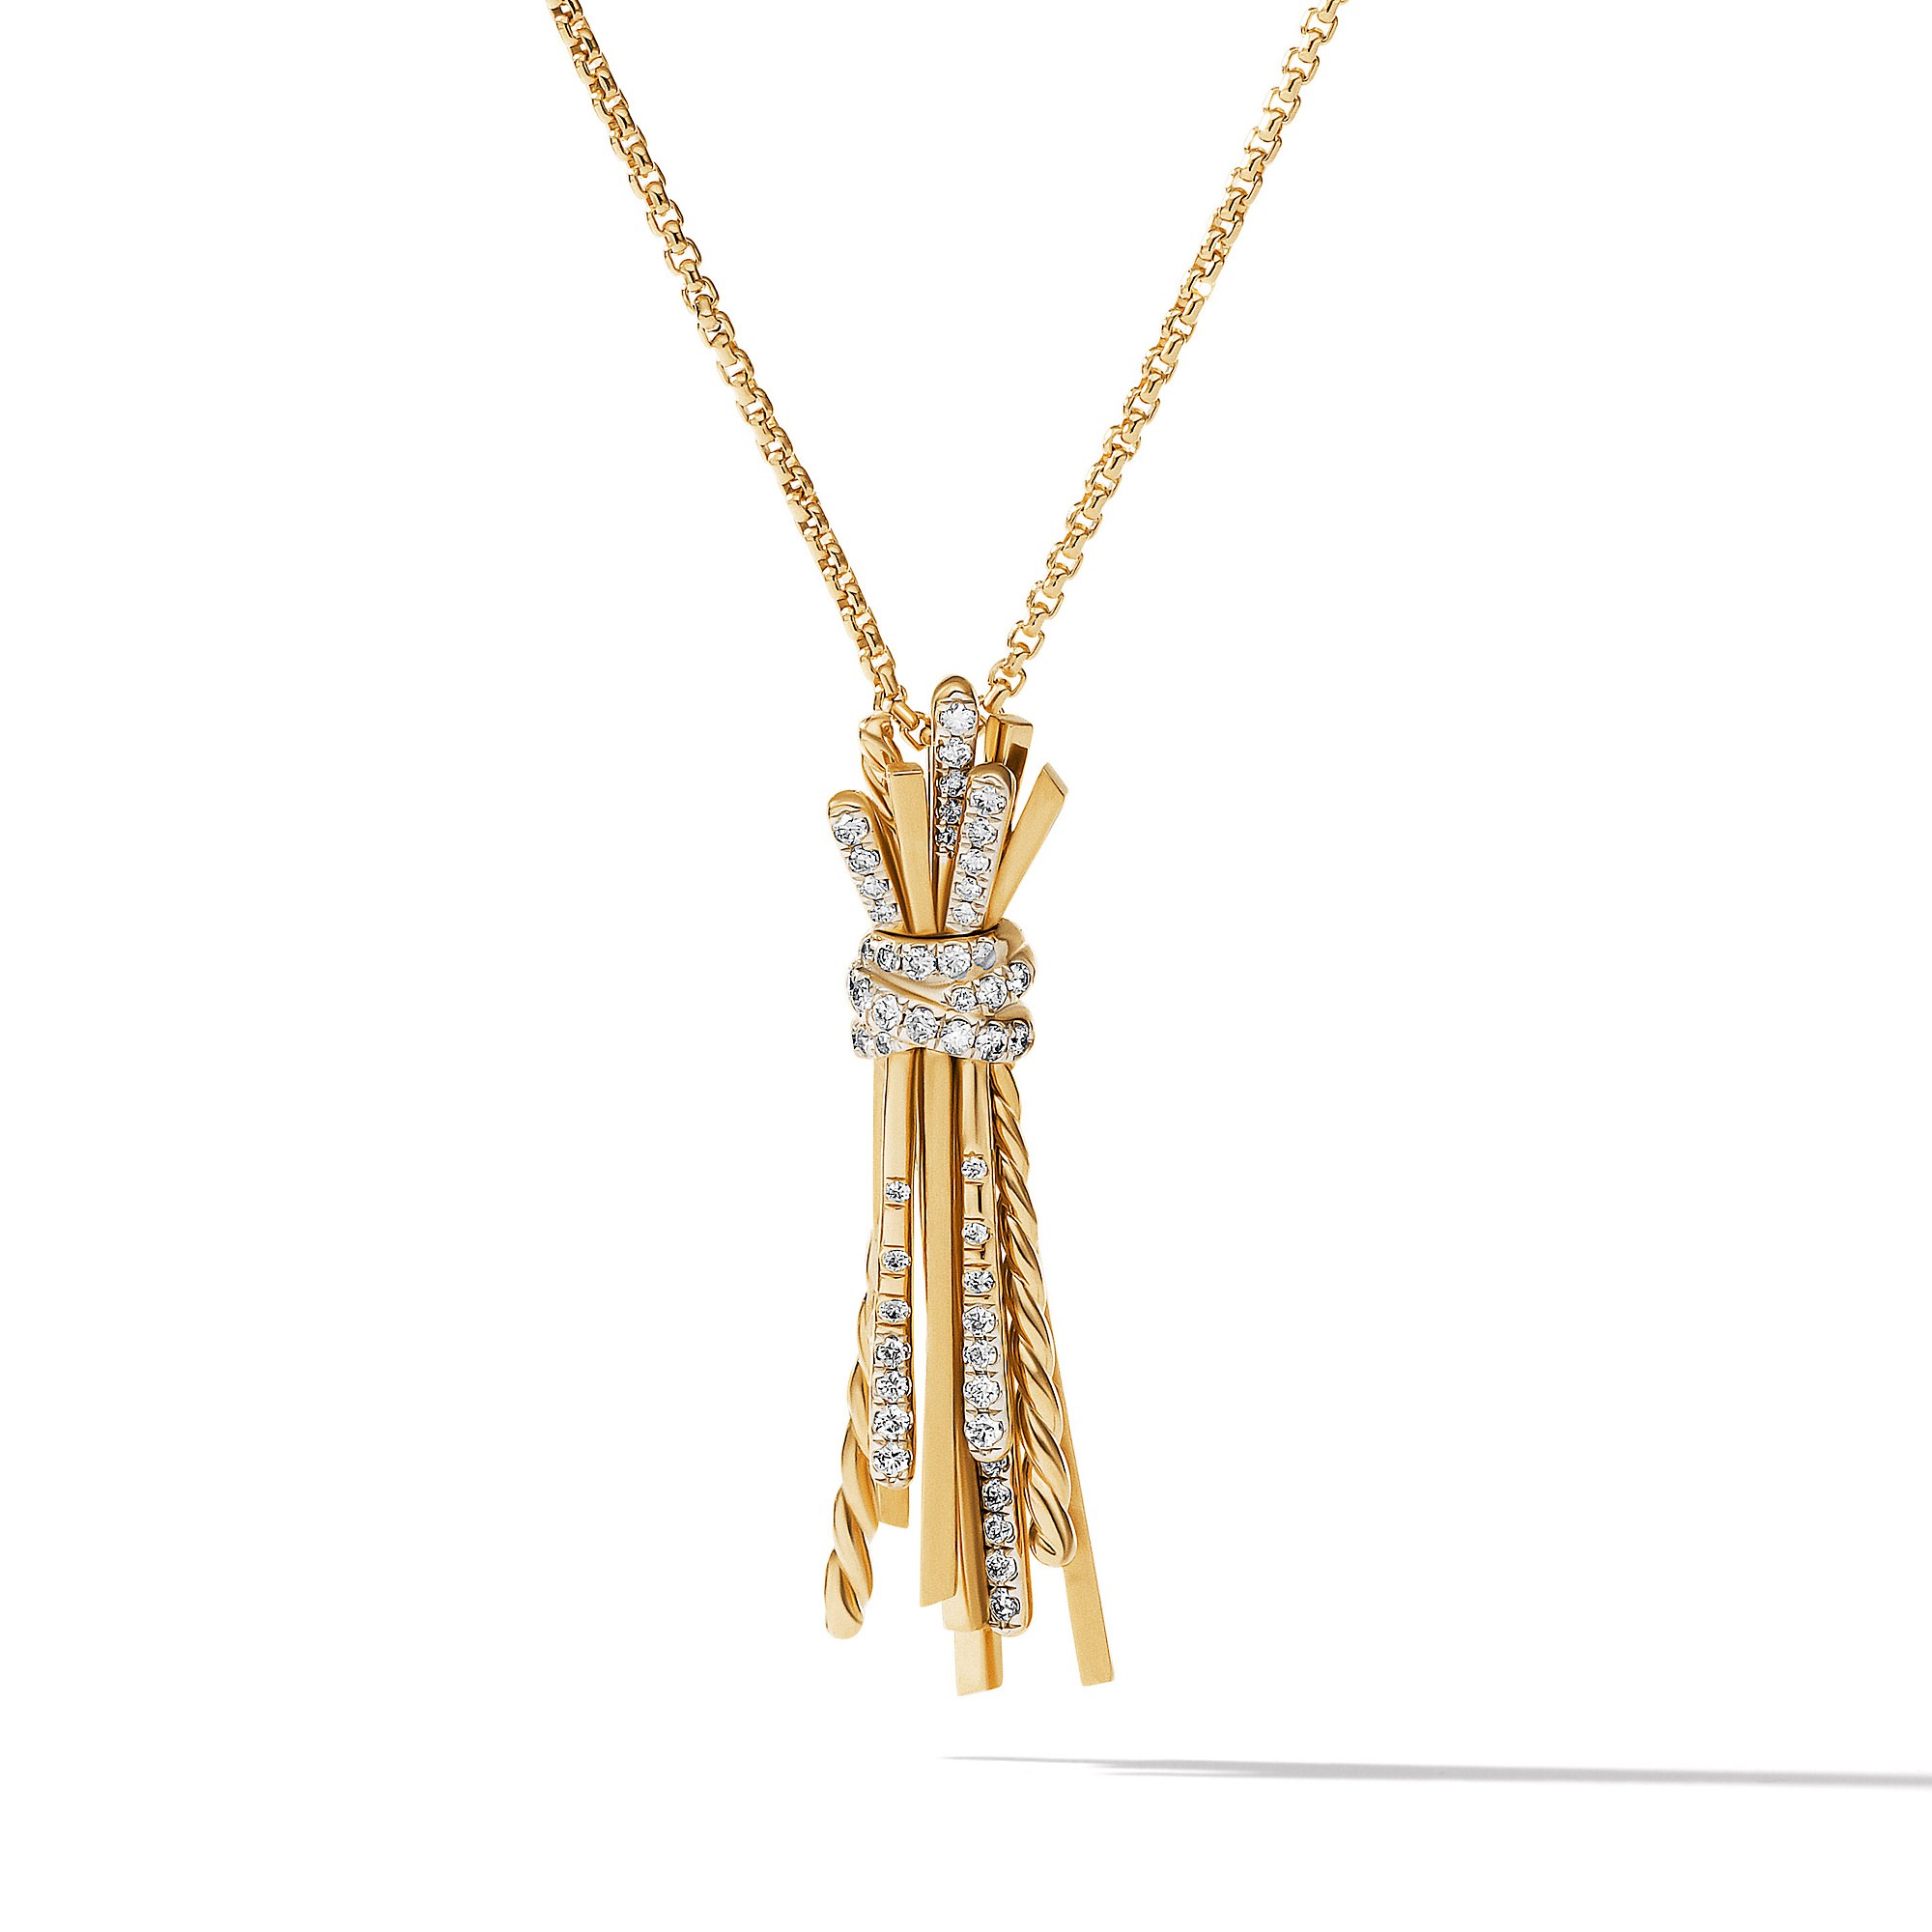 David Yurman Angelika Flair Pendant Necklace in 18K Yellow Gold with Pave Diamonds 2